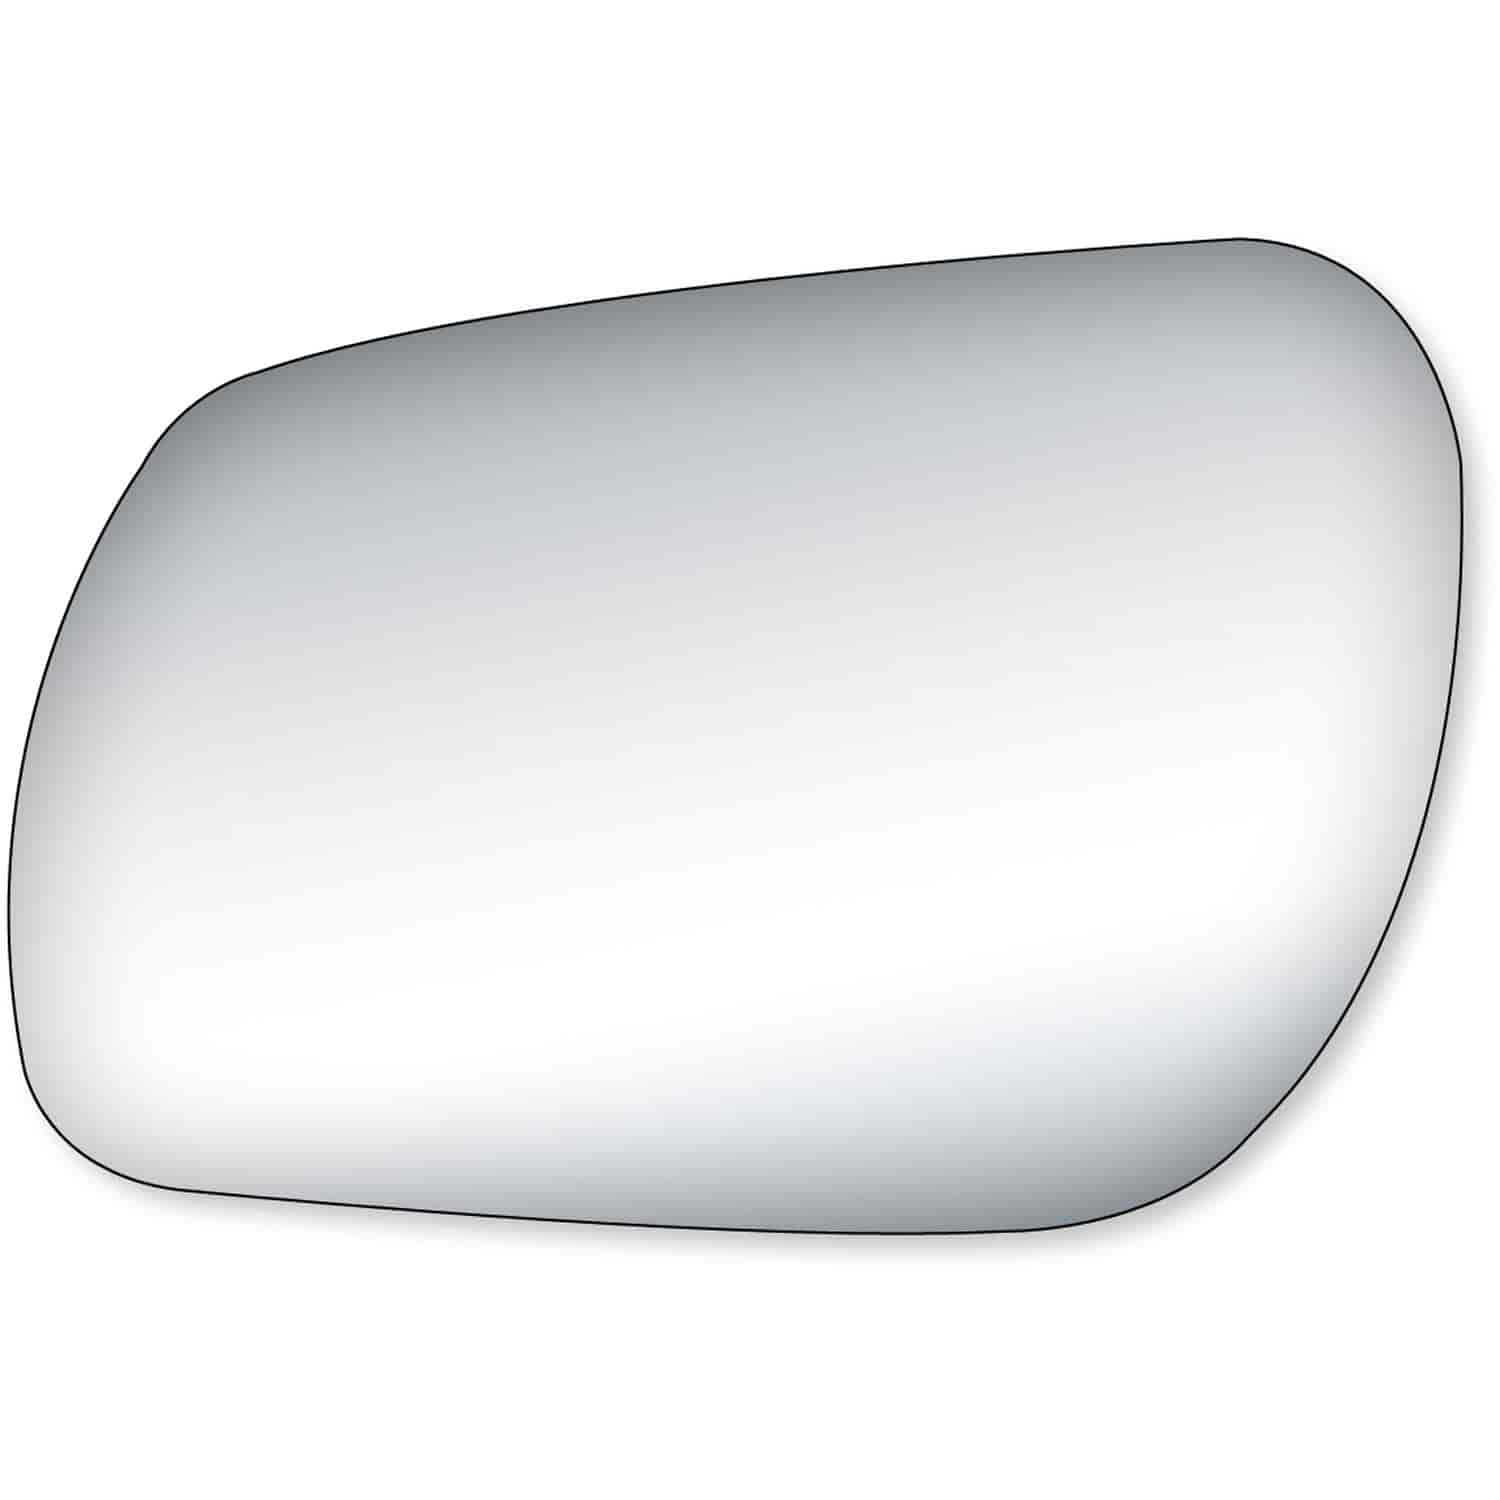 Replacement Glass for 04-09 Mazda 3; 06-08 Mazda 6 the glass measures 4 3/8 tall by 6 11/46 wide and